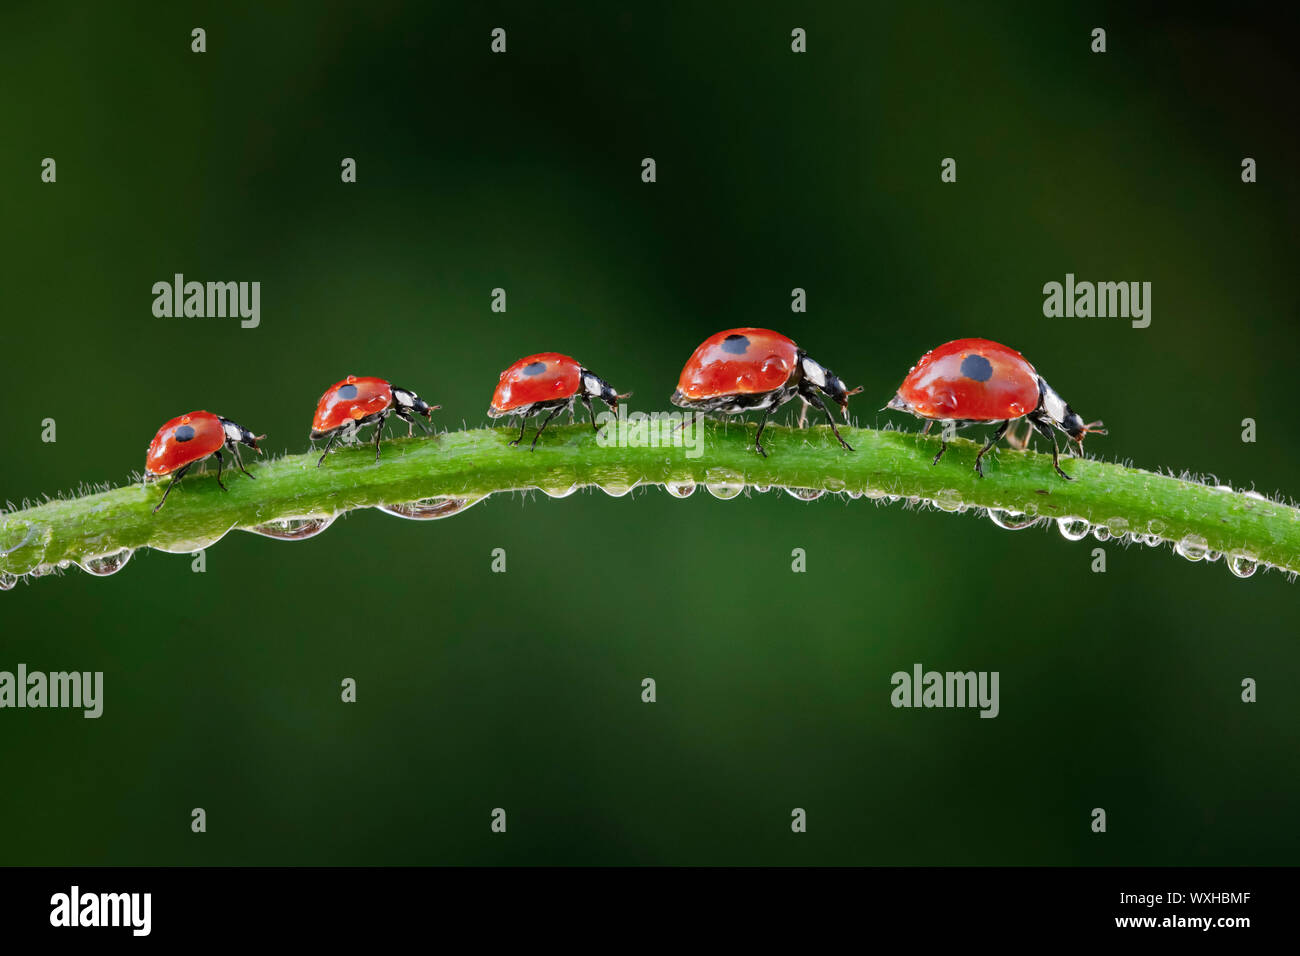 Two-spotted Ladybird, Two-spotted Lady Beetle (Adalia bipunctata). Five beetles on a dew-covered stalk. Digital composing. Stock Photo